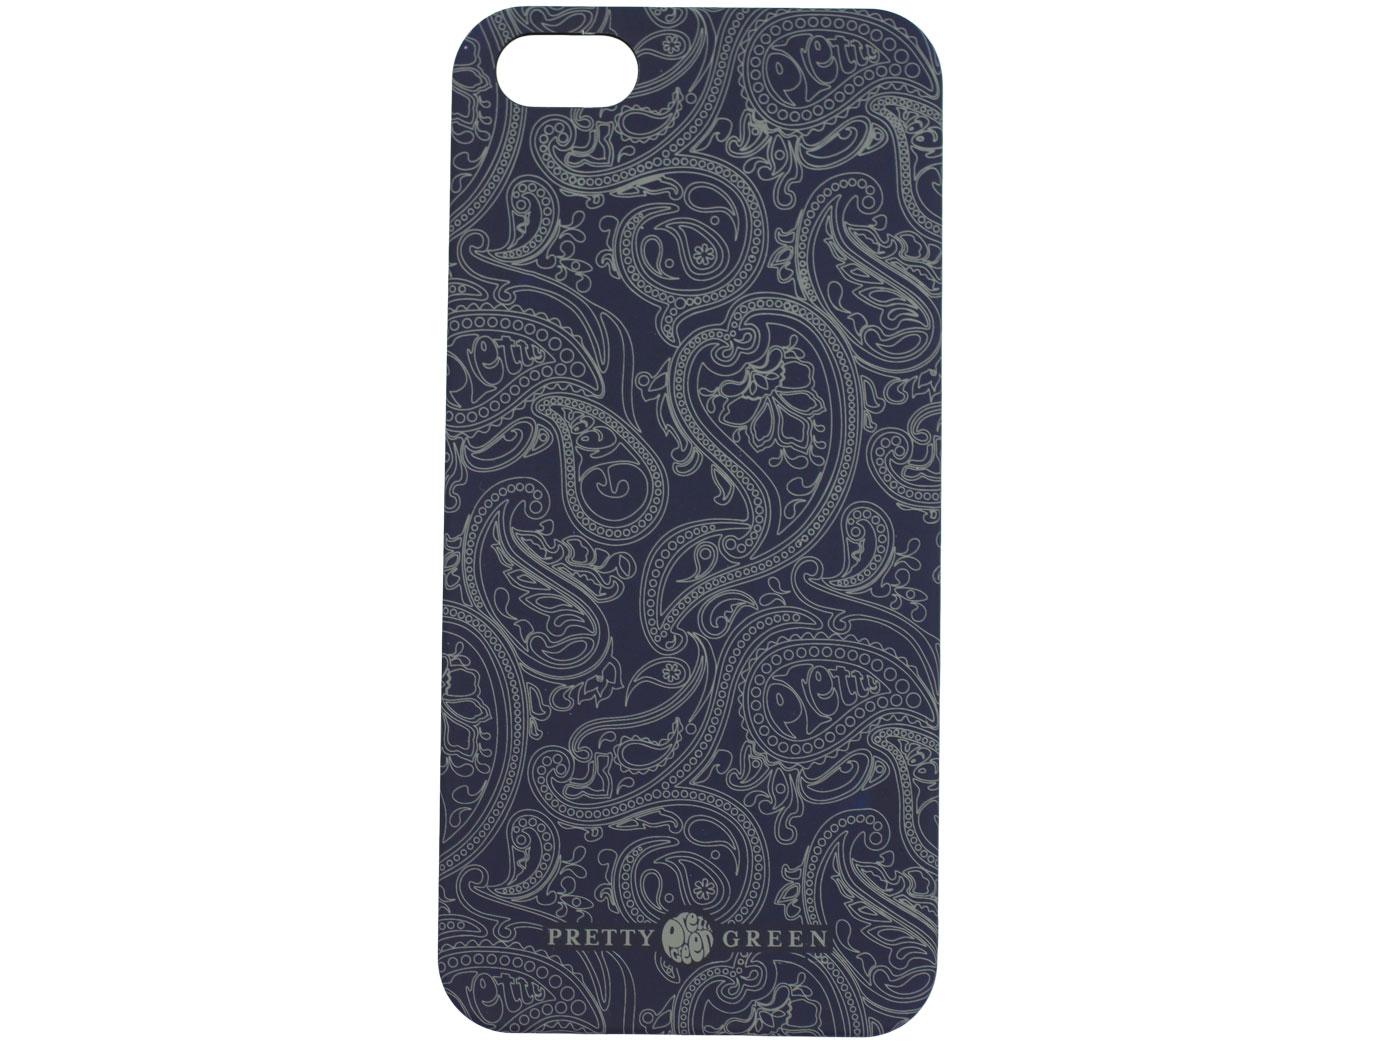 PRETTY GREEN Retro 60s Mod Paisley iPhone 5 Case in Navy